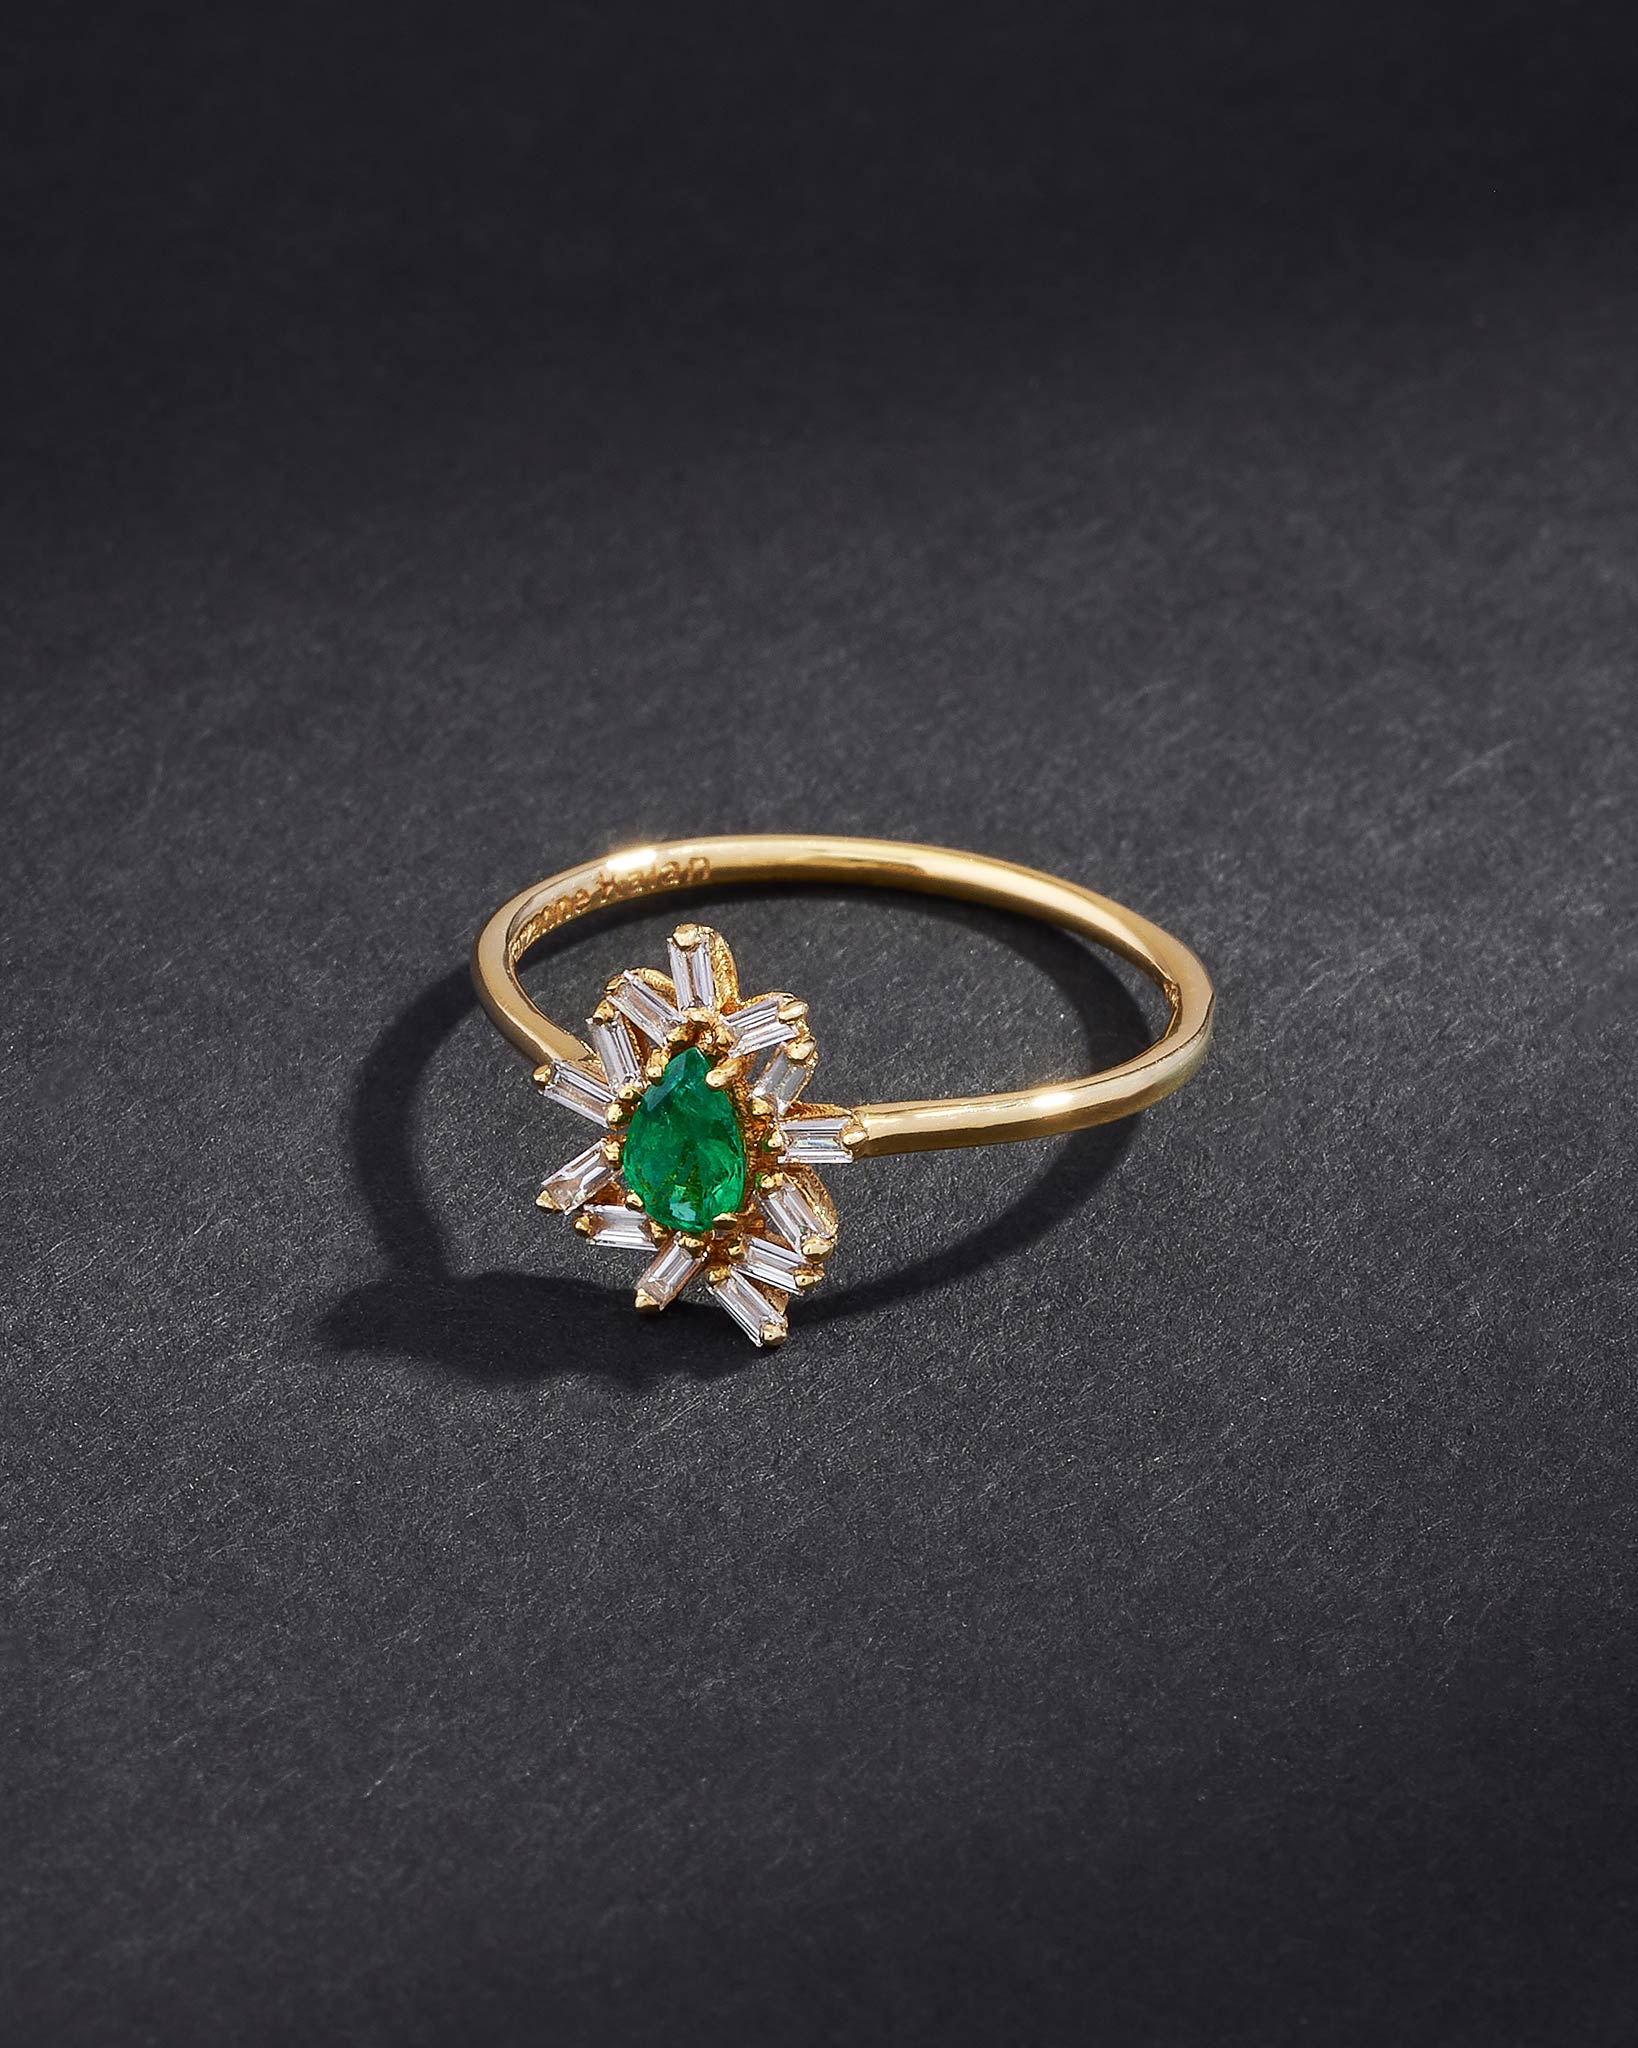 Suzanne Kalan One of a Kind Pear Shaped Emerald and Baguette Diamond Ring in 18k yellow gold